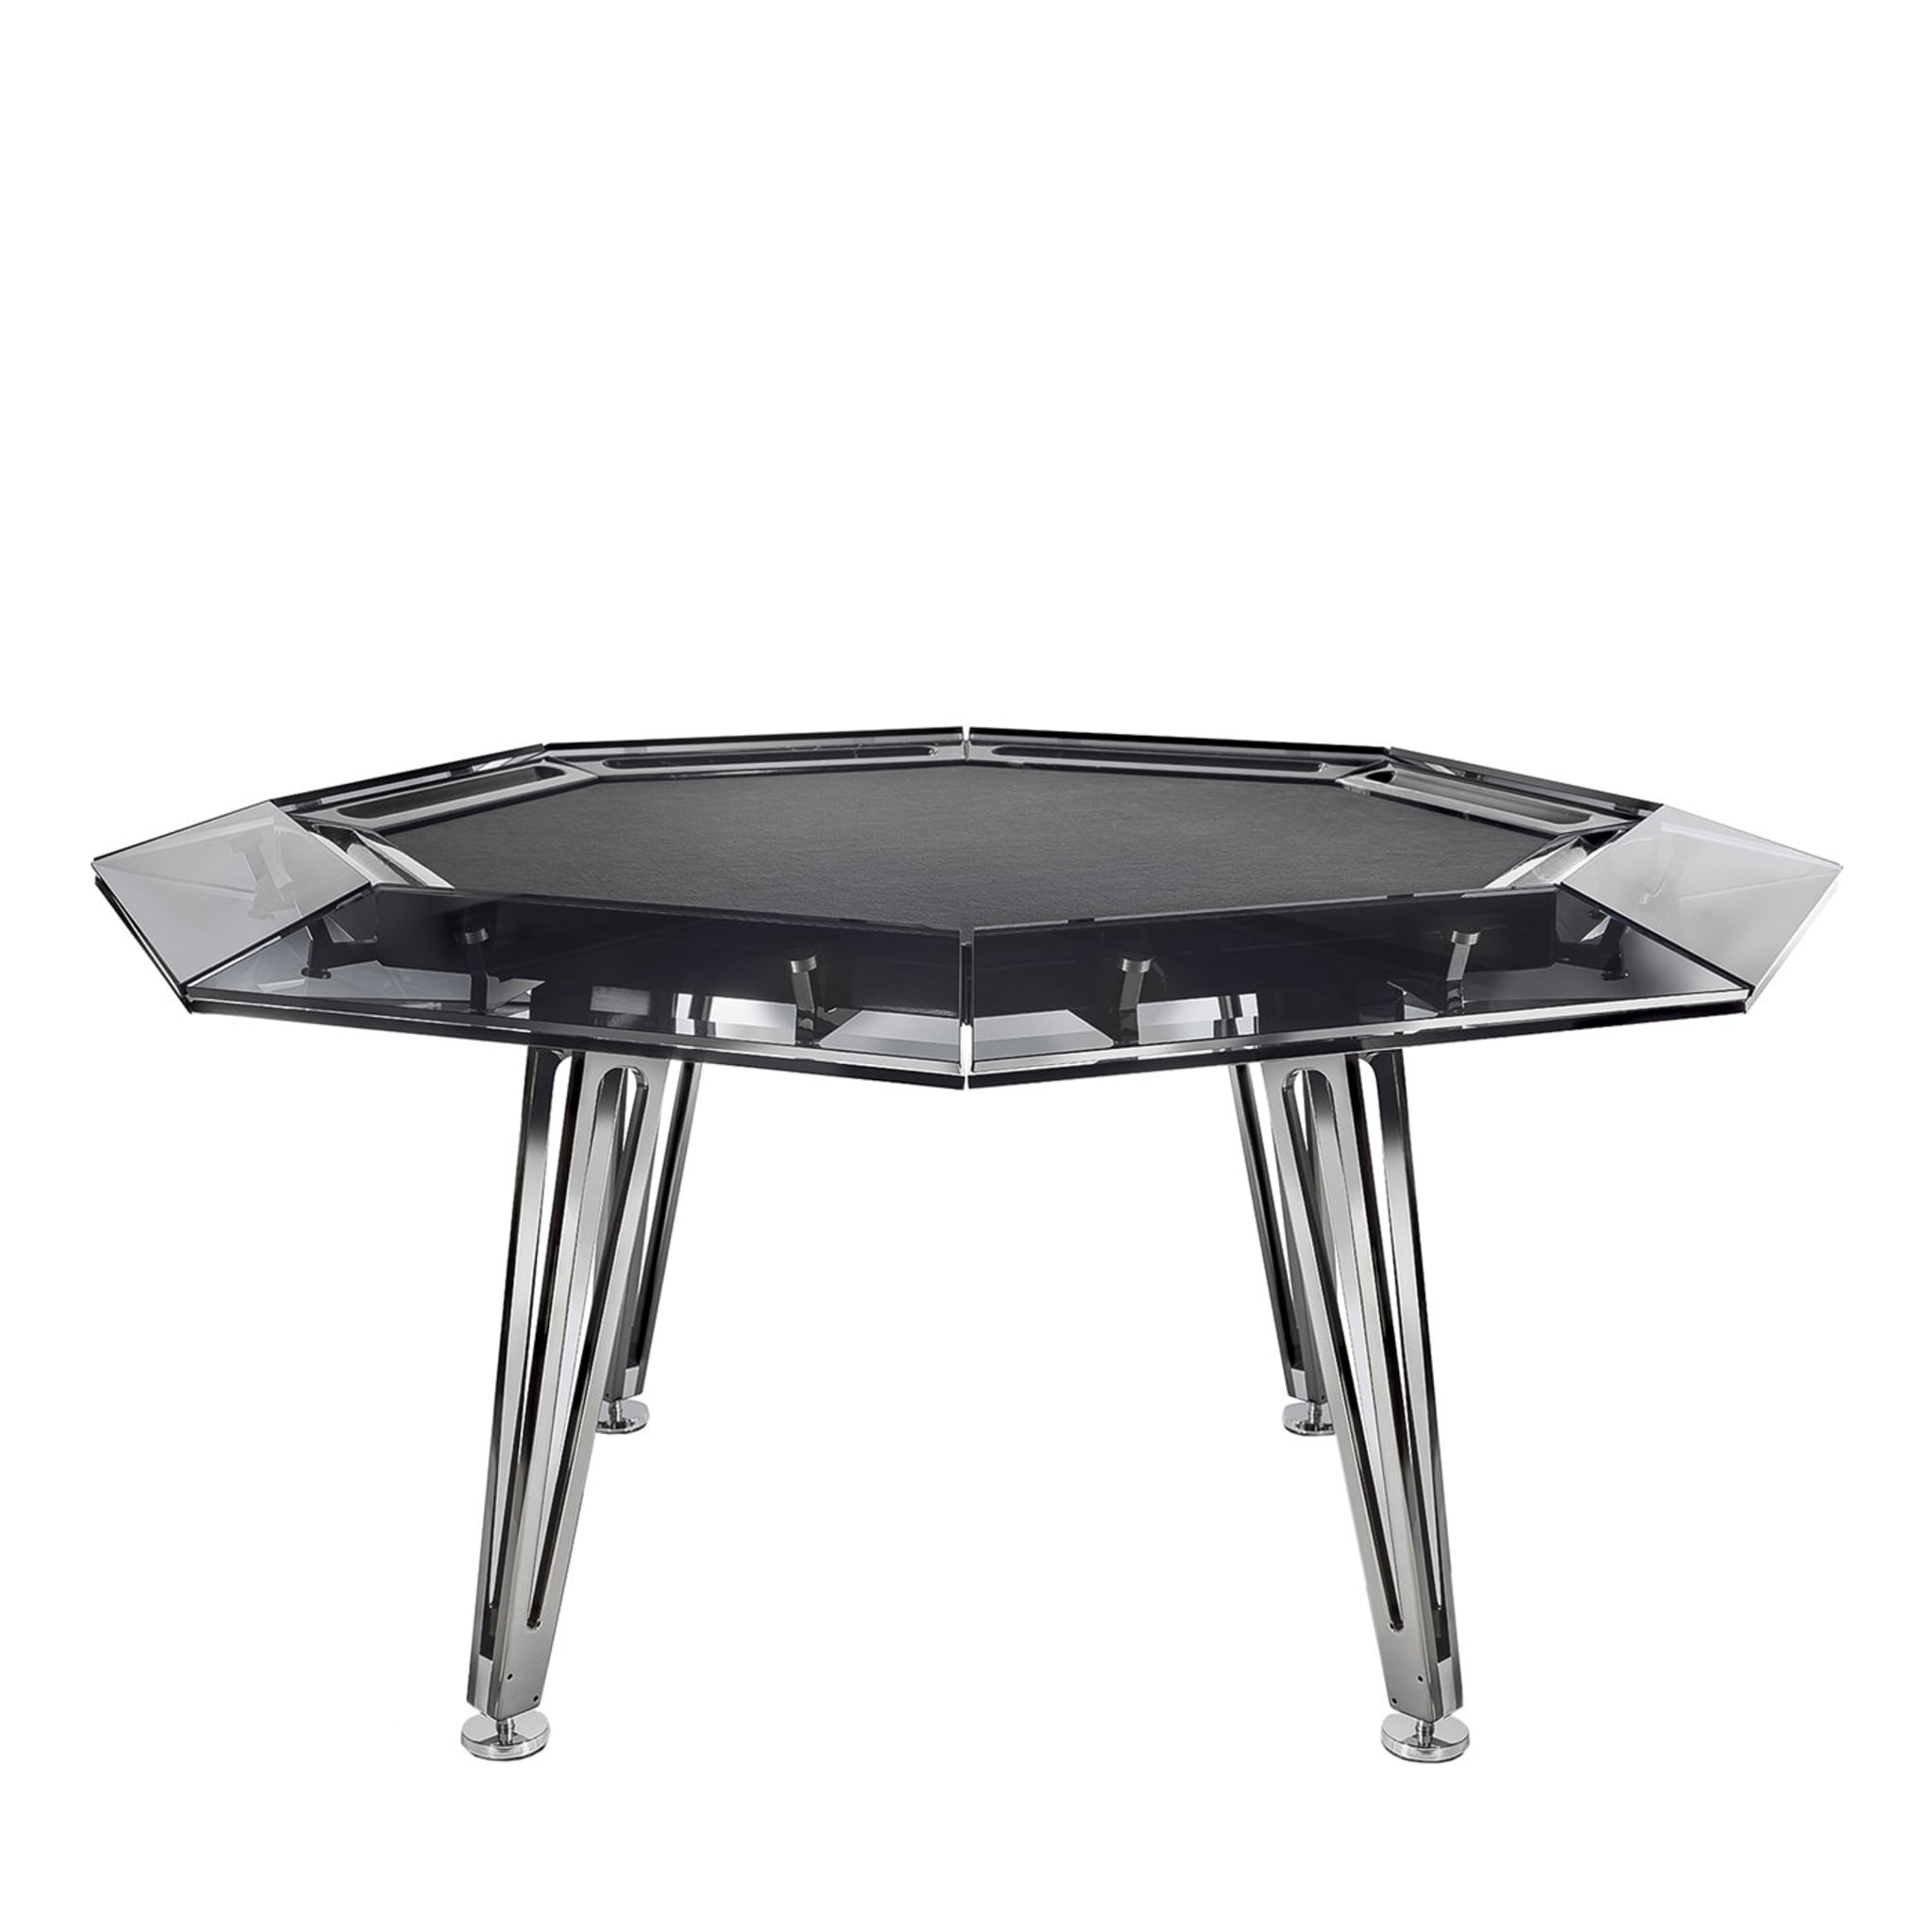 Unootto 8-Player Black Poker Table - Main view